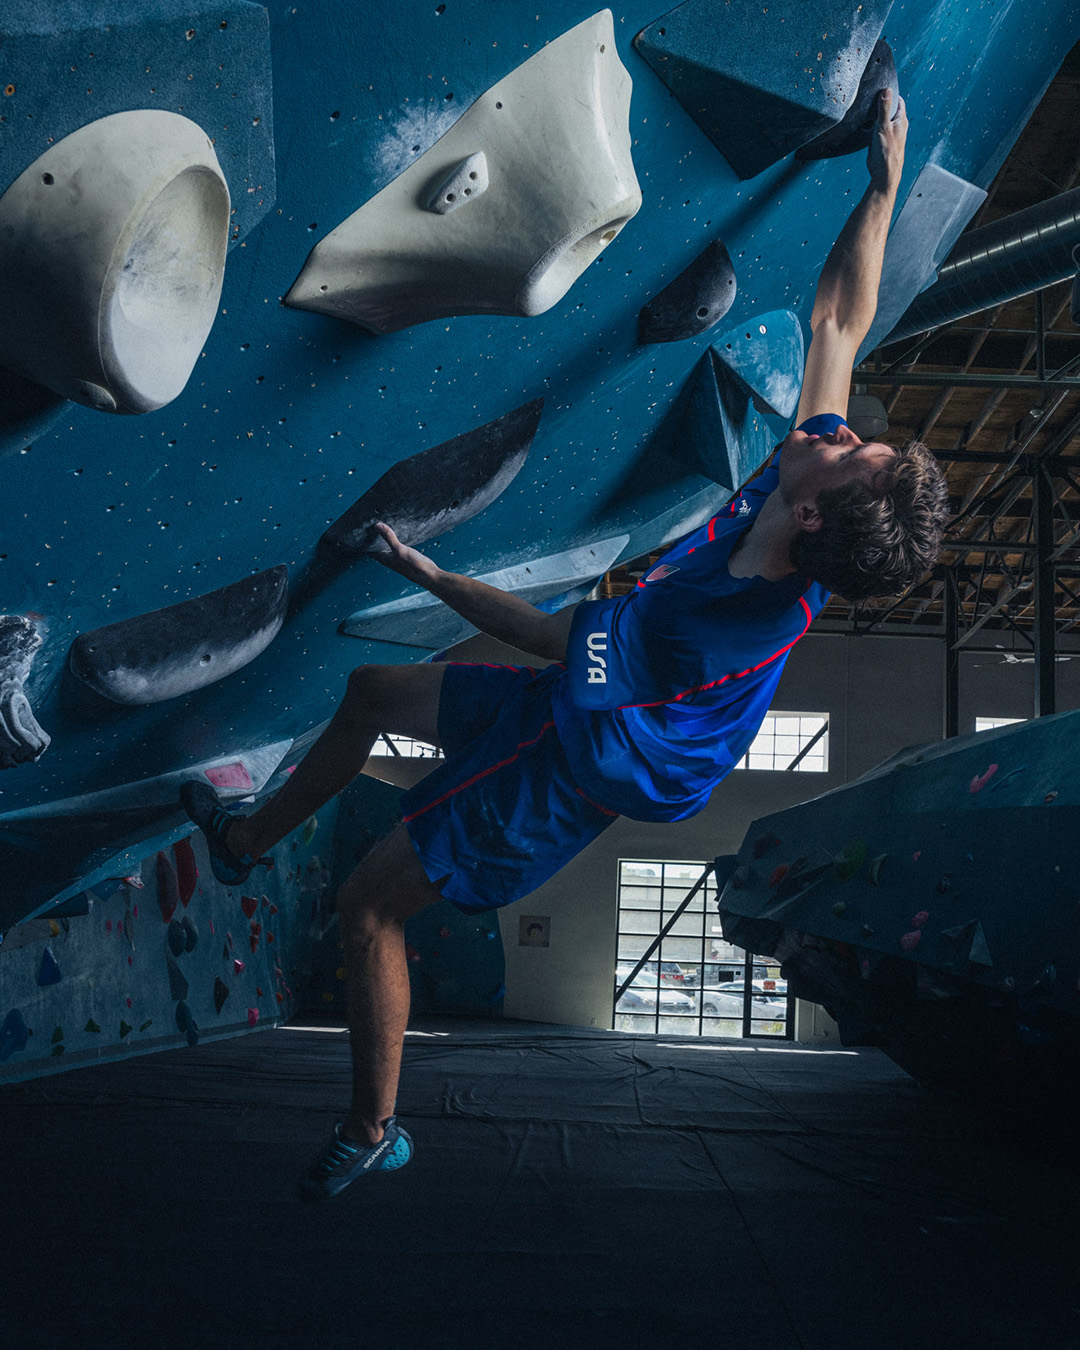 Person in athletic wear rock climbing indoors, reaching for a hold on an inclined wall